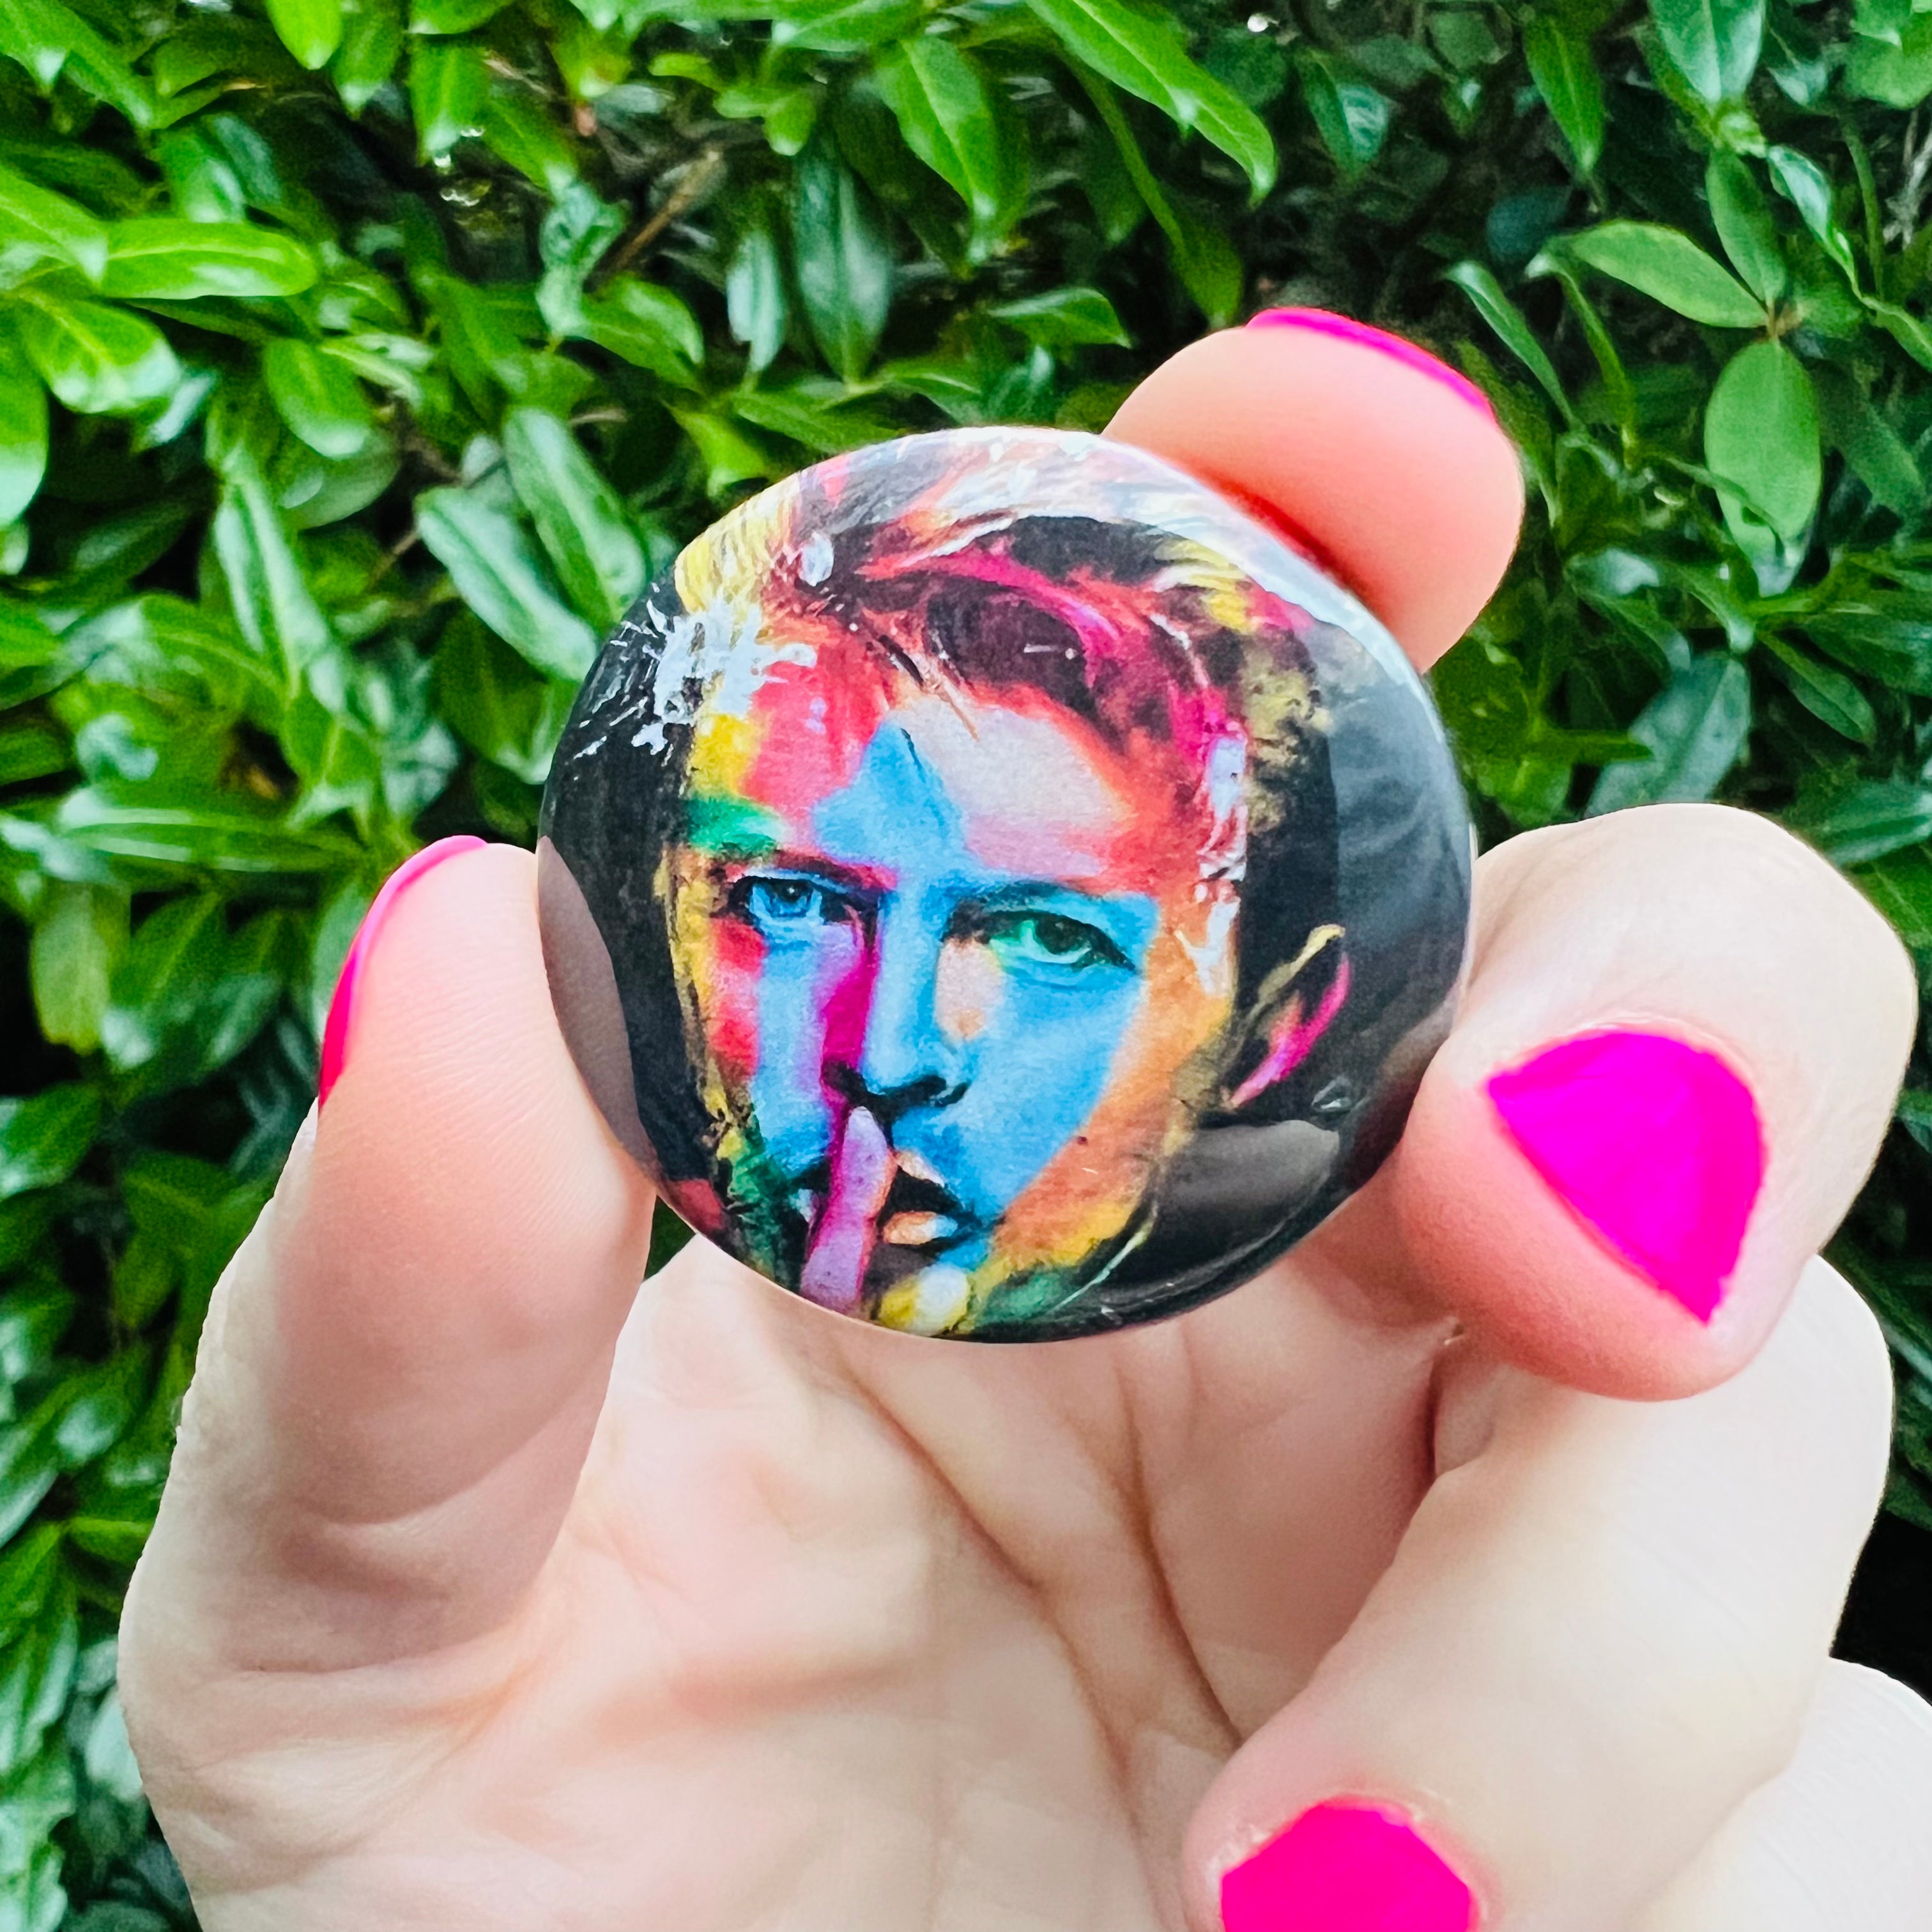 David Bowie Abstract Art Pin Back Button or Magnet